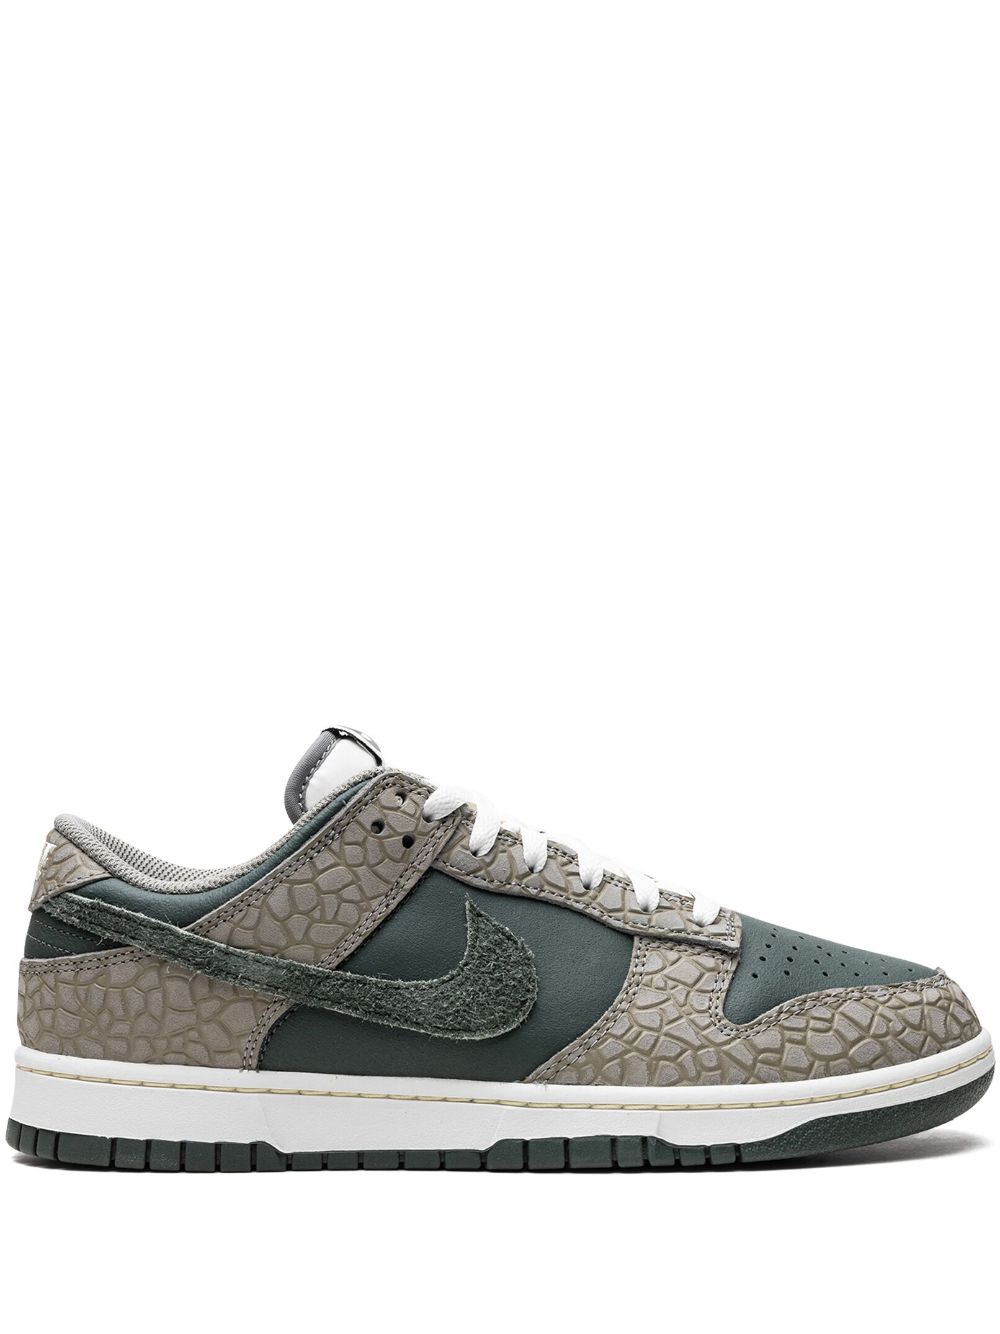 Image 1 of Nike Dunk Low "Urban Landscape 2.0" sneakers